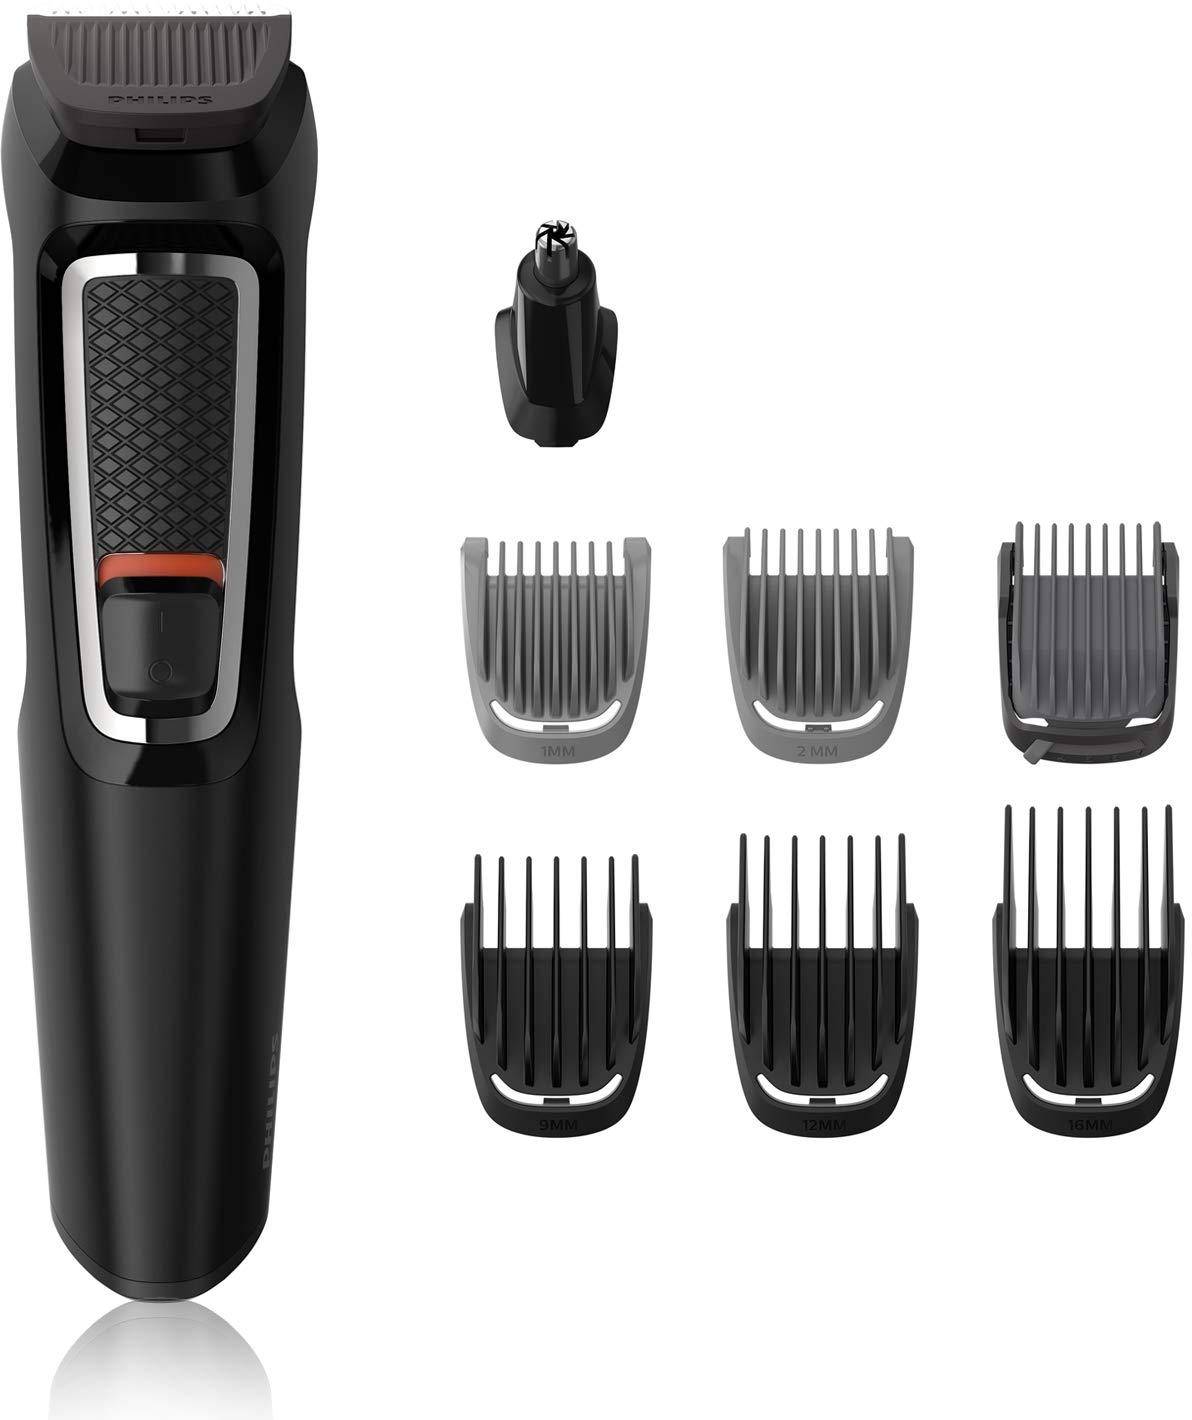 Philips MG3730 Multi-Grooming Kit 8-in-1 Face and Hair Trimmer For Men  zoom image